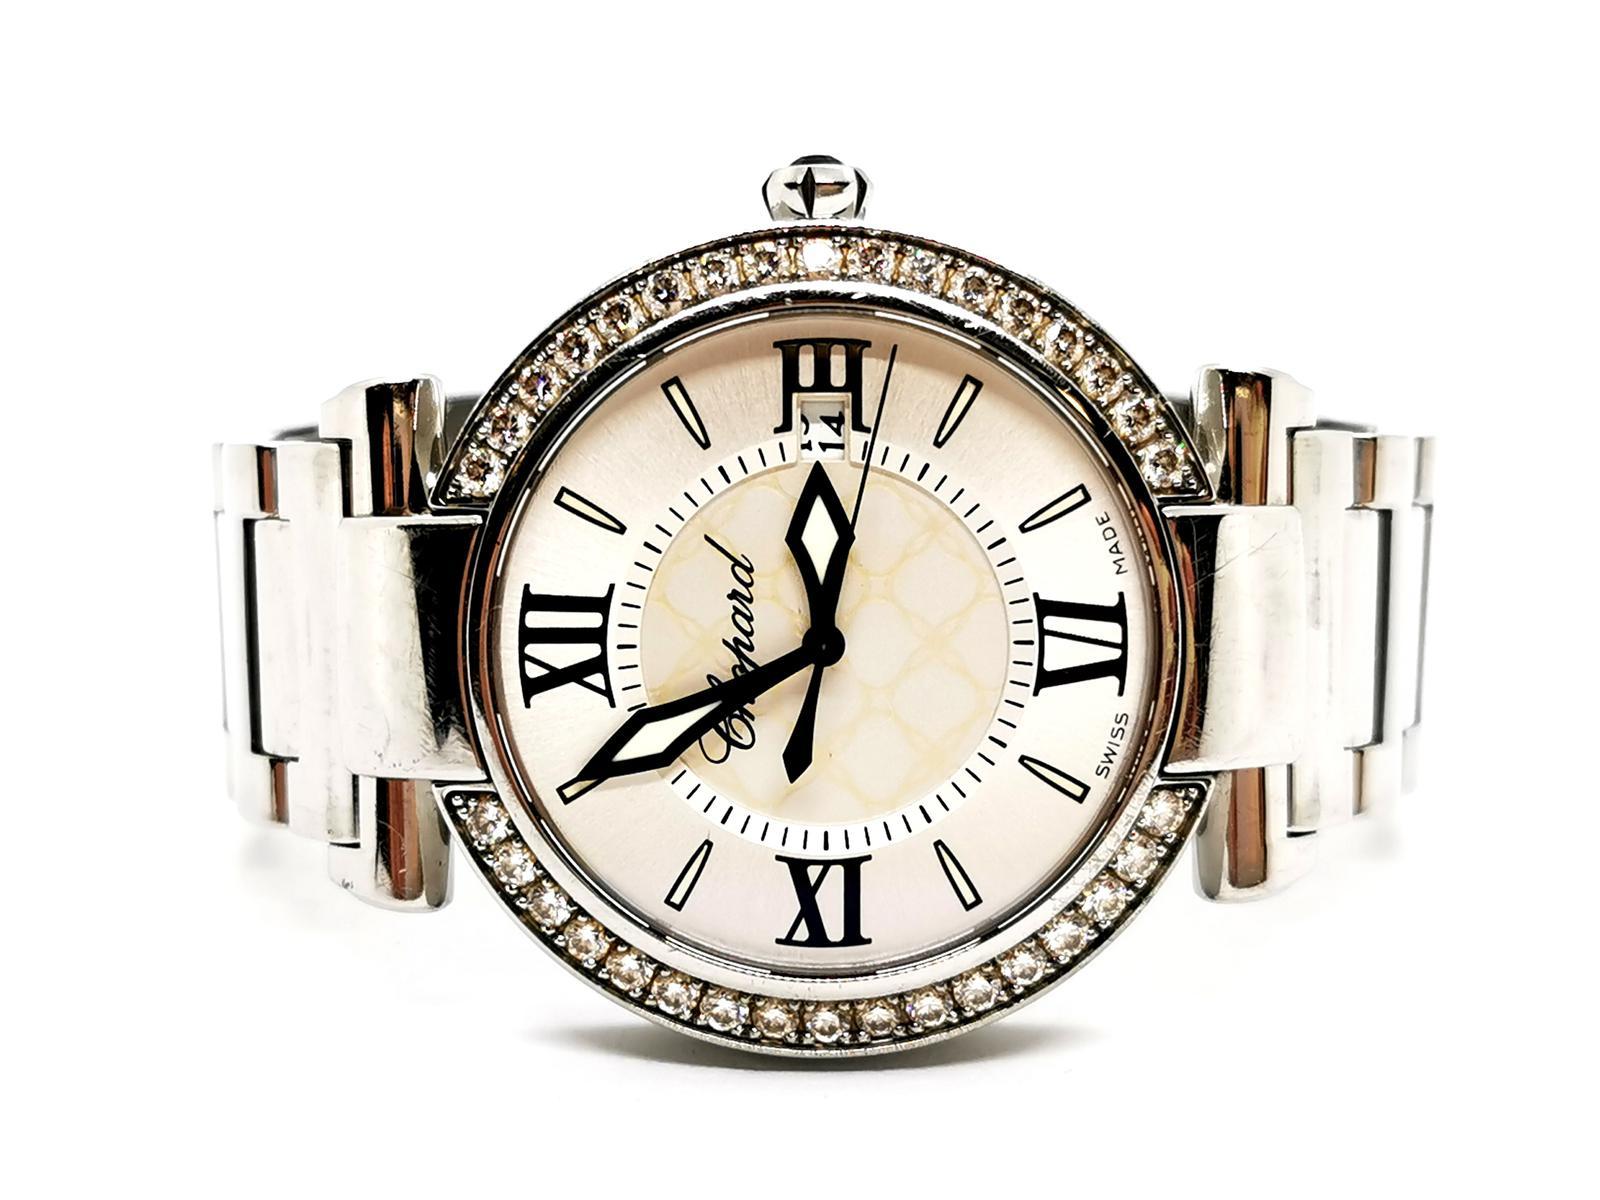 Shows signed Chopard. Imperial model. stainless steel. bezel 37 brilliant cut diamonds. for a total of about 1.17 carats. size 36 mm housing. quartz movement. clasp. silver dial with center pearl. set on the crown of about 0.06 ct amethyst. wrist